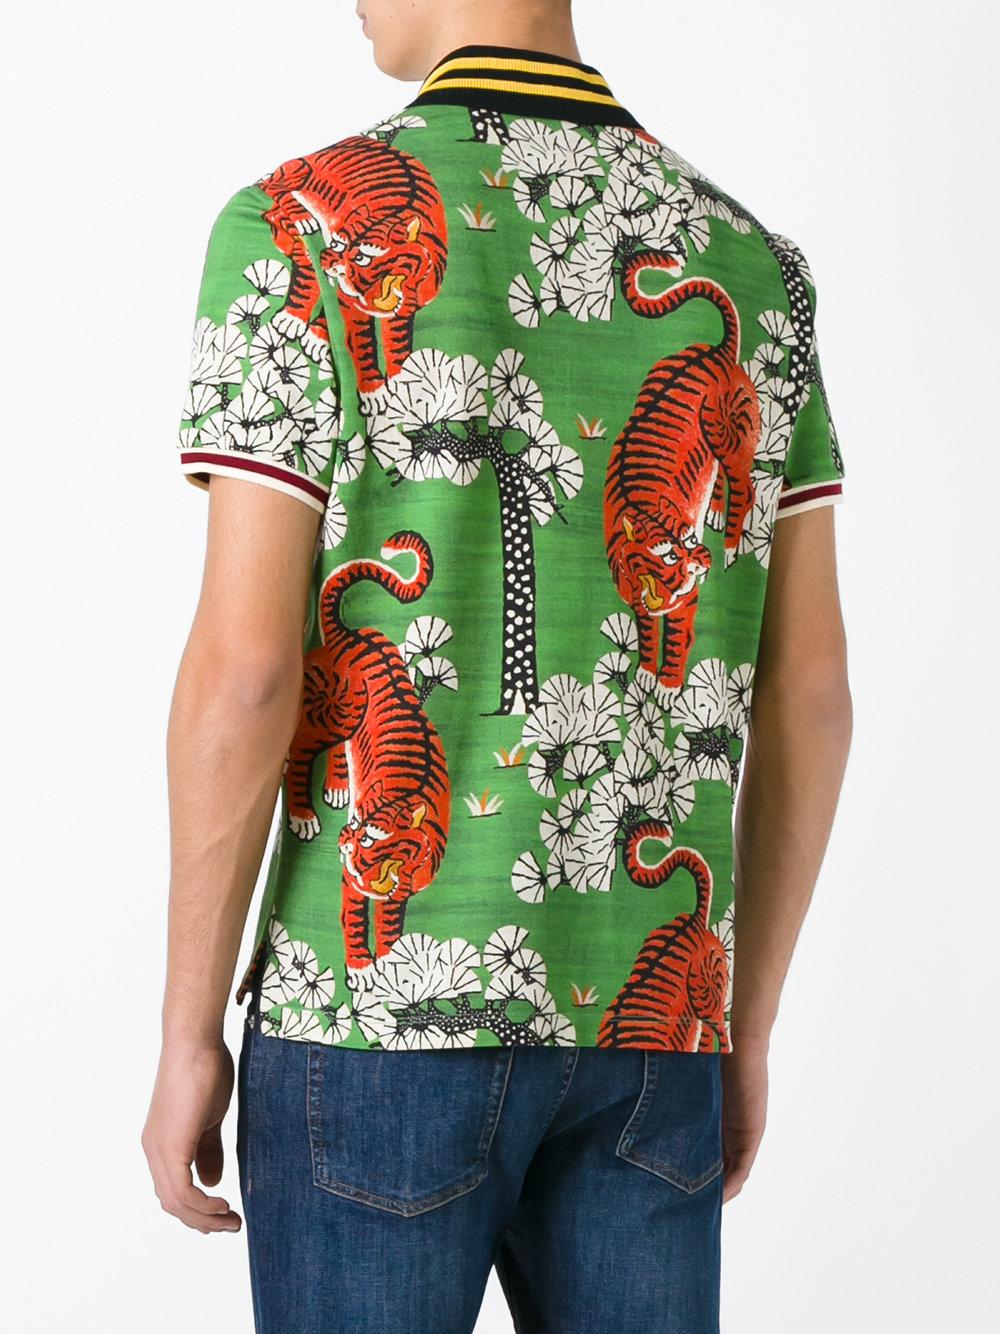 Lyst - Gucci Bengal Print Polo Shirt in Green for Men